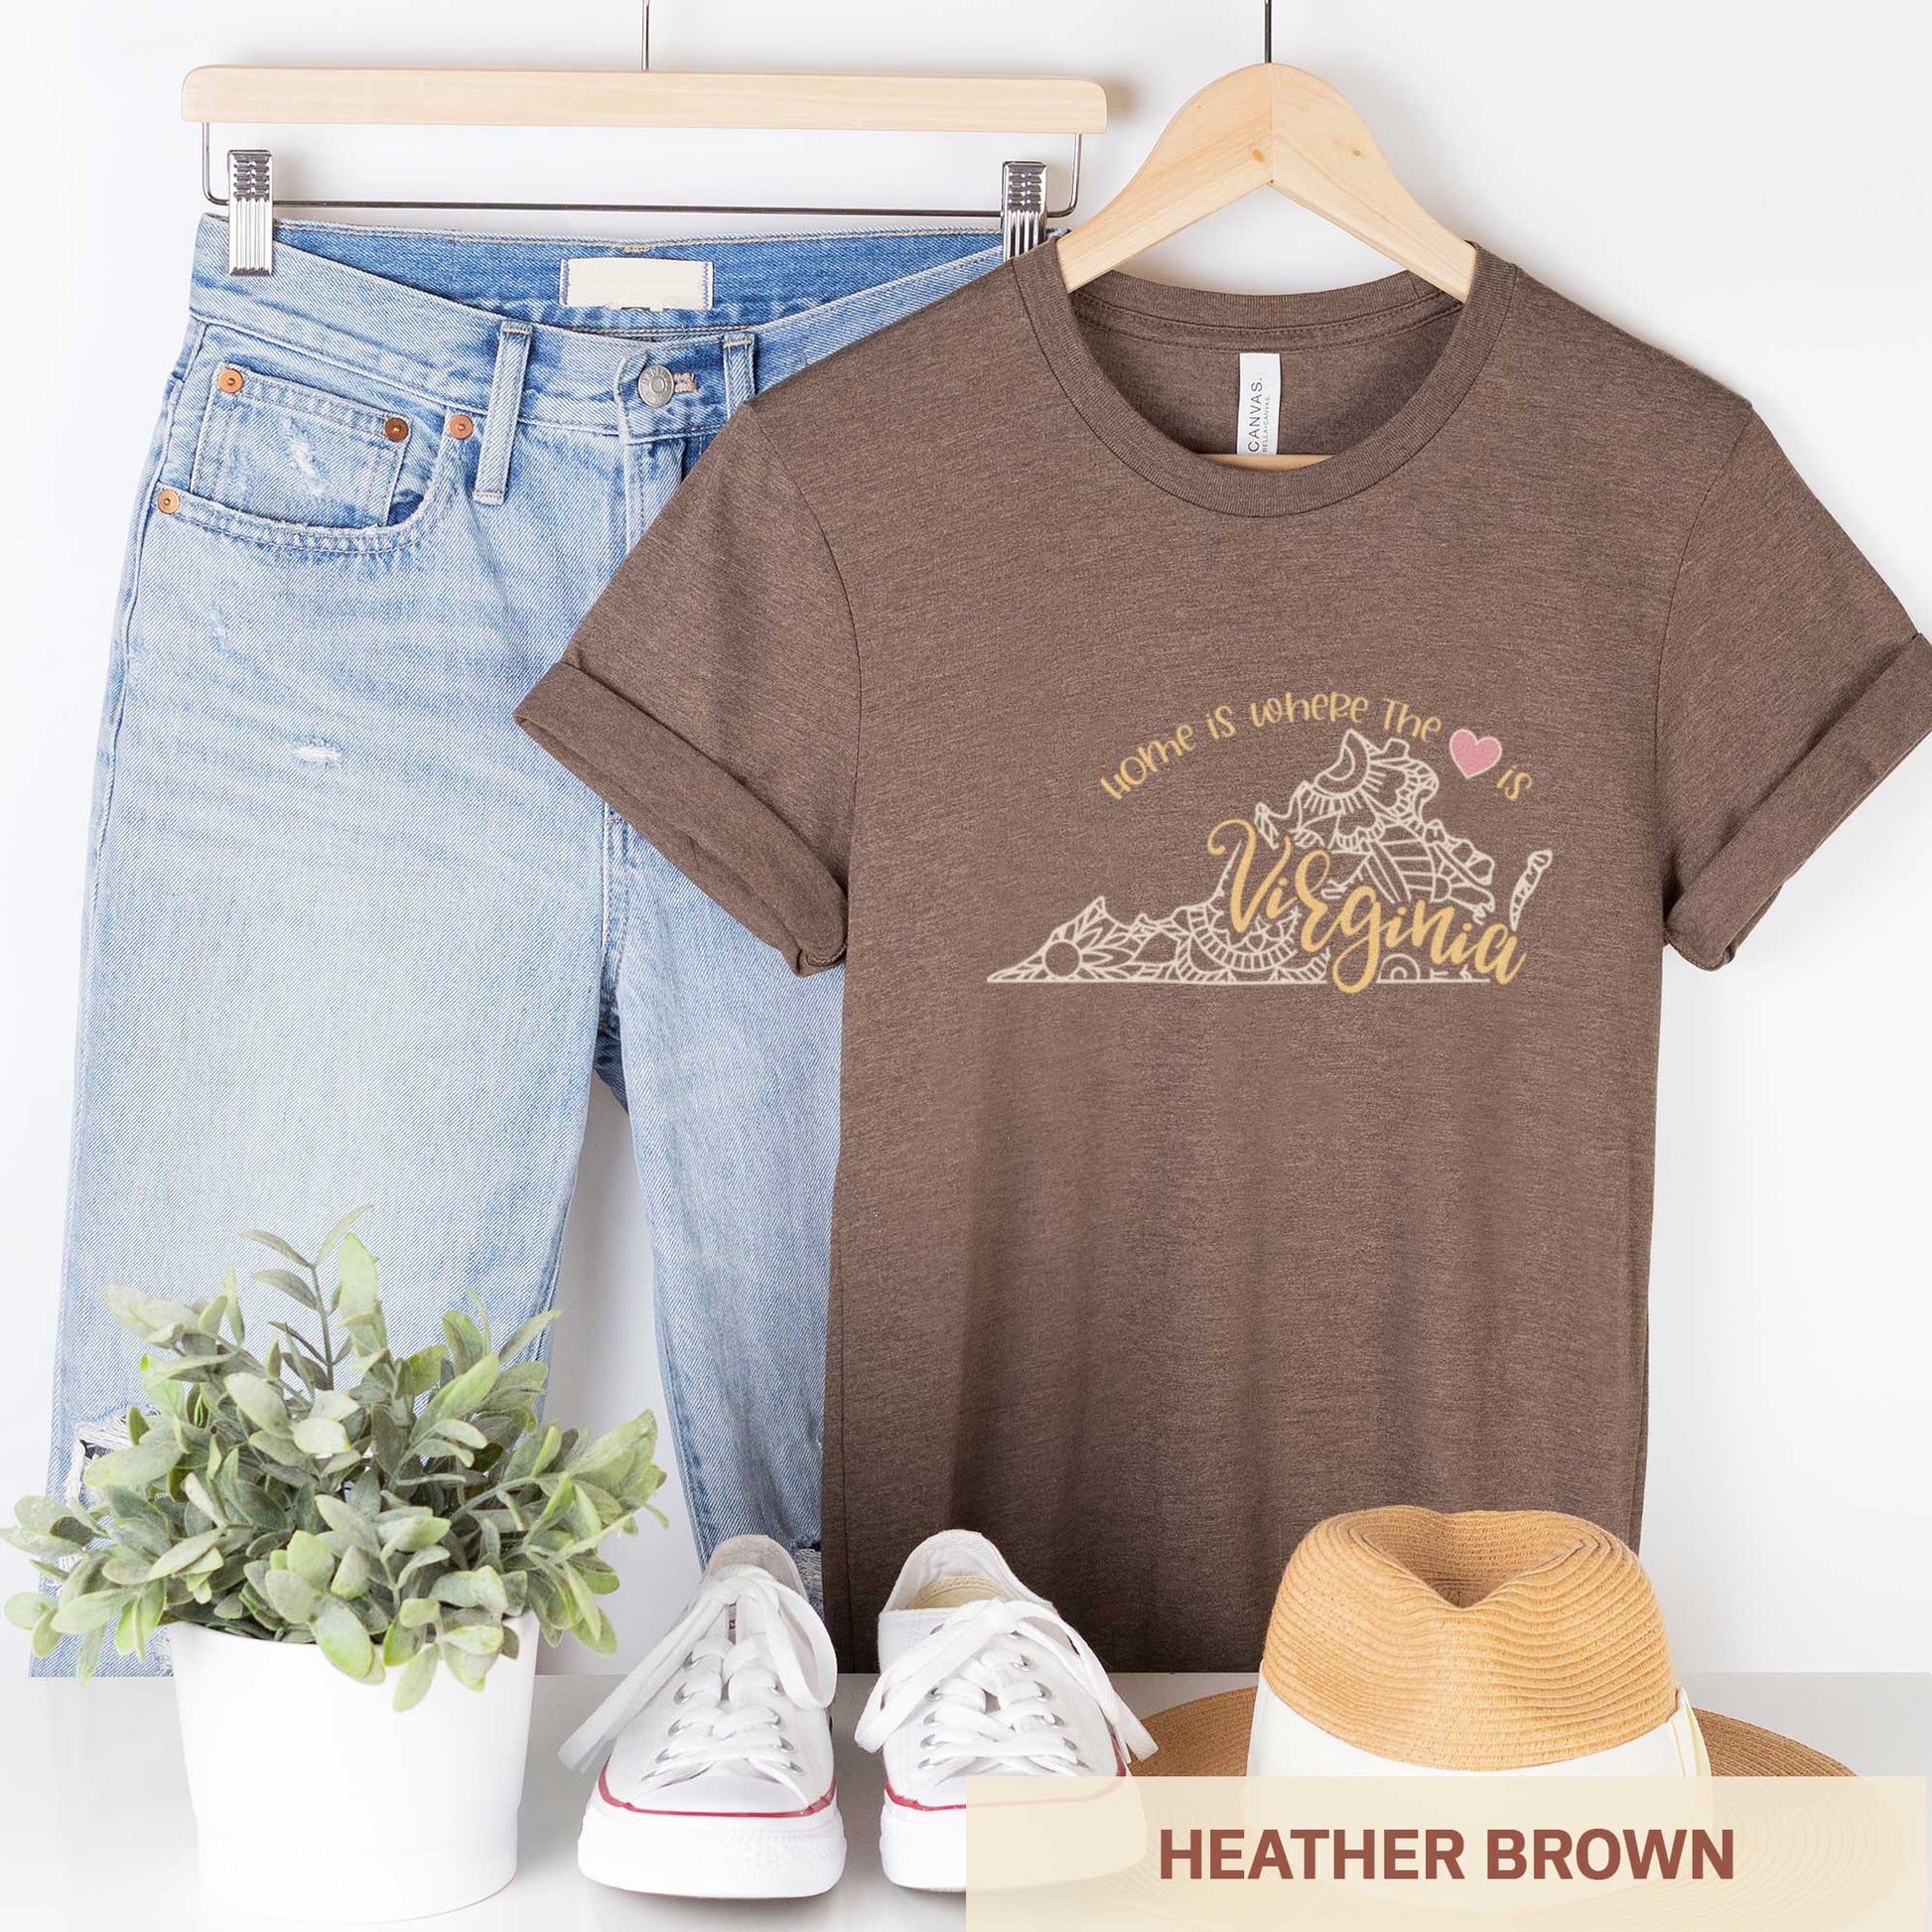 A hanging heather brown Bella Canvas t-shirt featuring a mandala in the shape of Virginia with the words home is where the heart is.